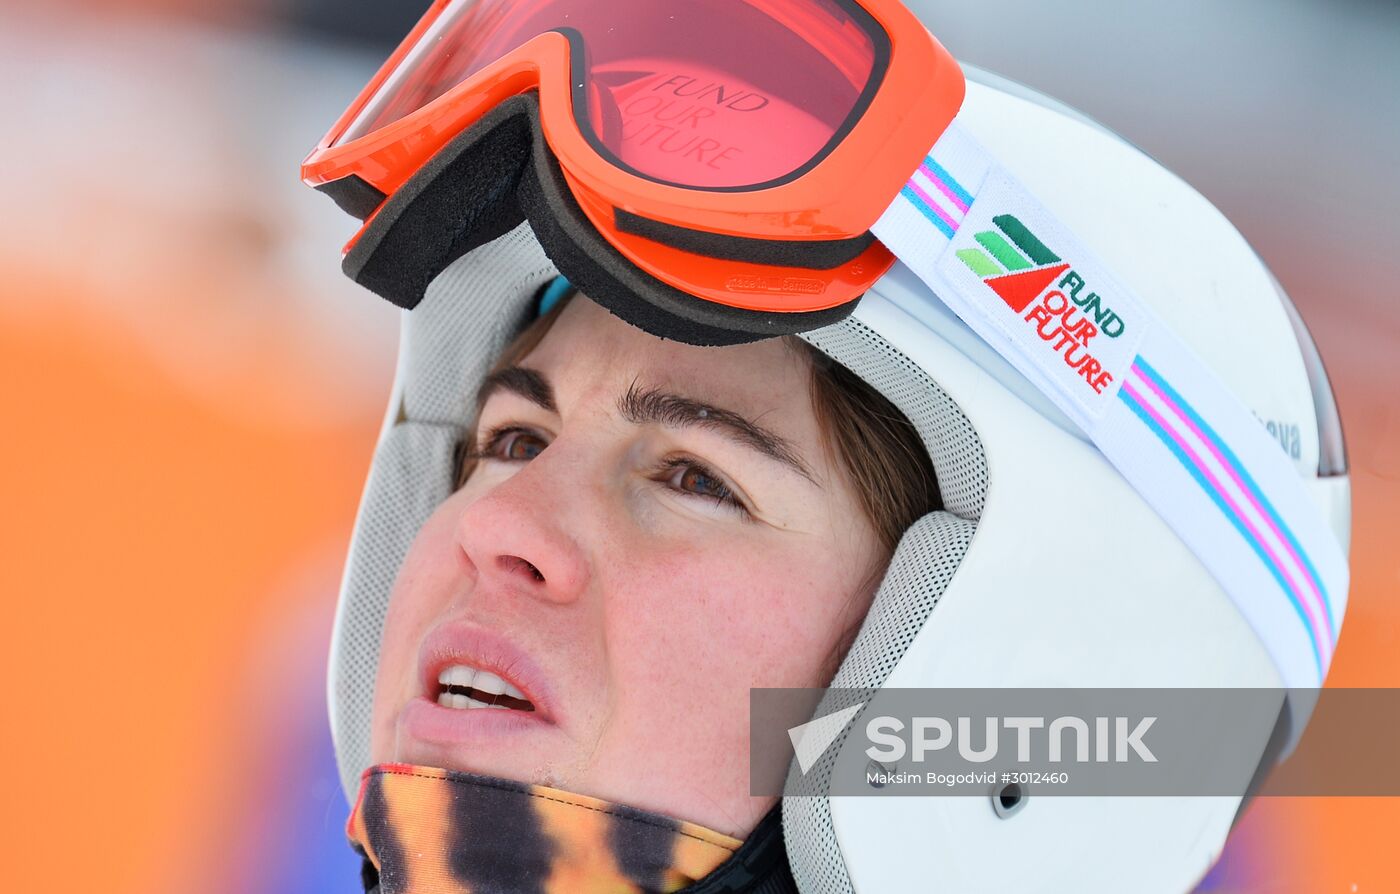 Russian Snowboarding Championships. Parallel giant slalom